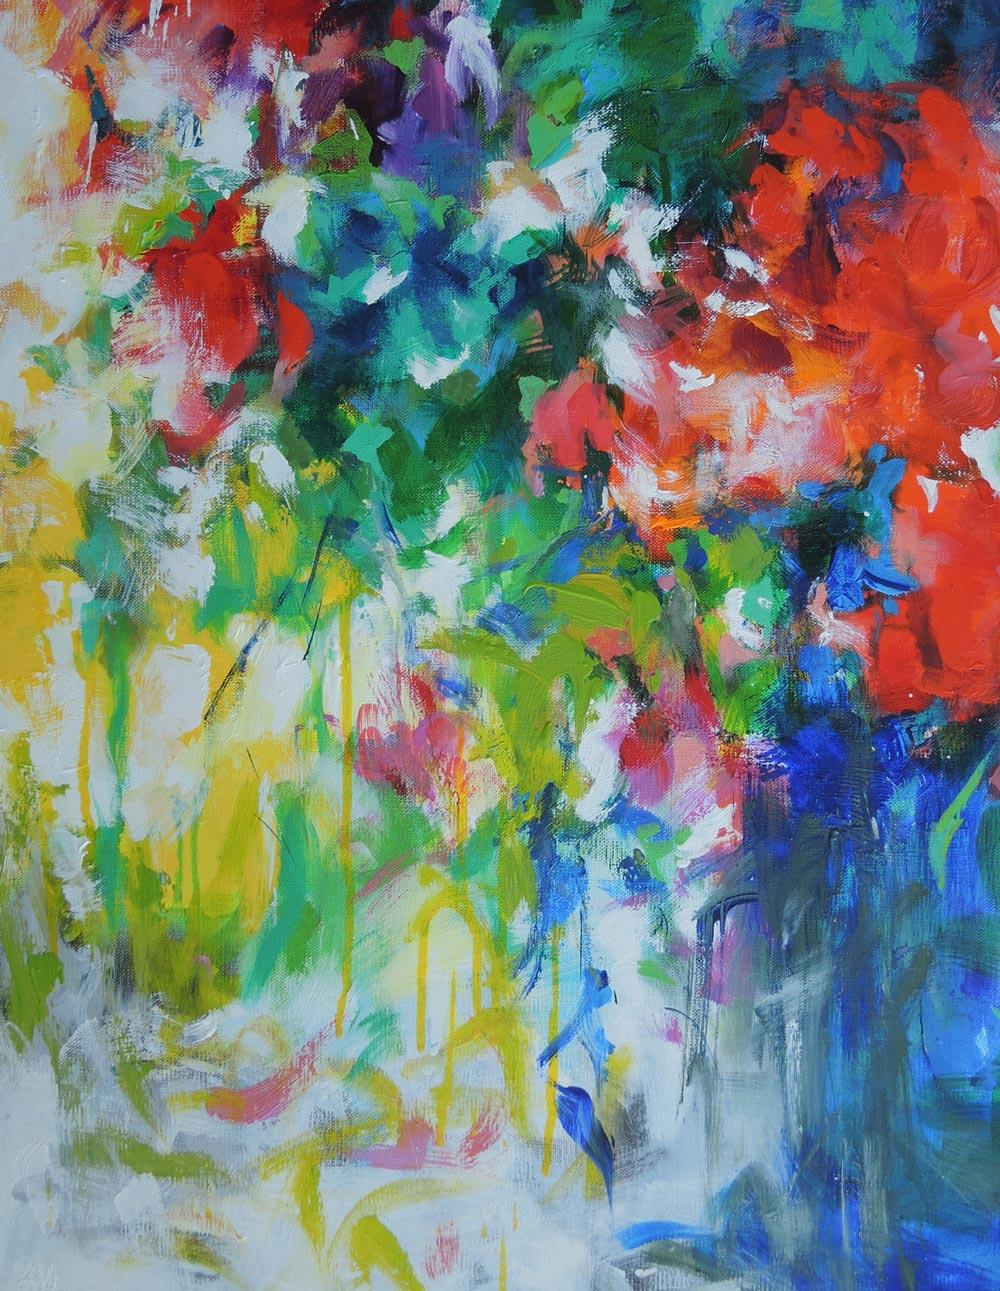 Bouquet in a Blue Vase, colourful abstract flower painting on canvas, Floral art - Painting by Mary Chaplin